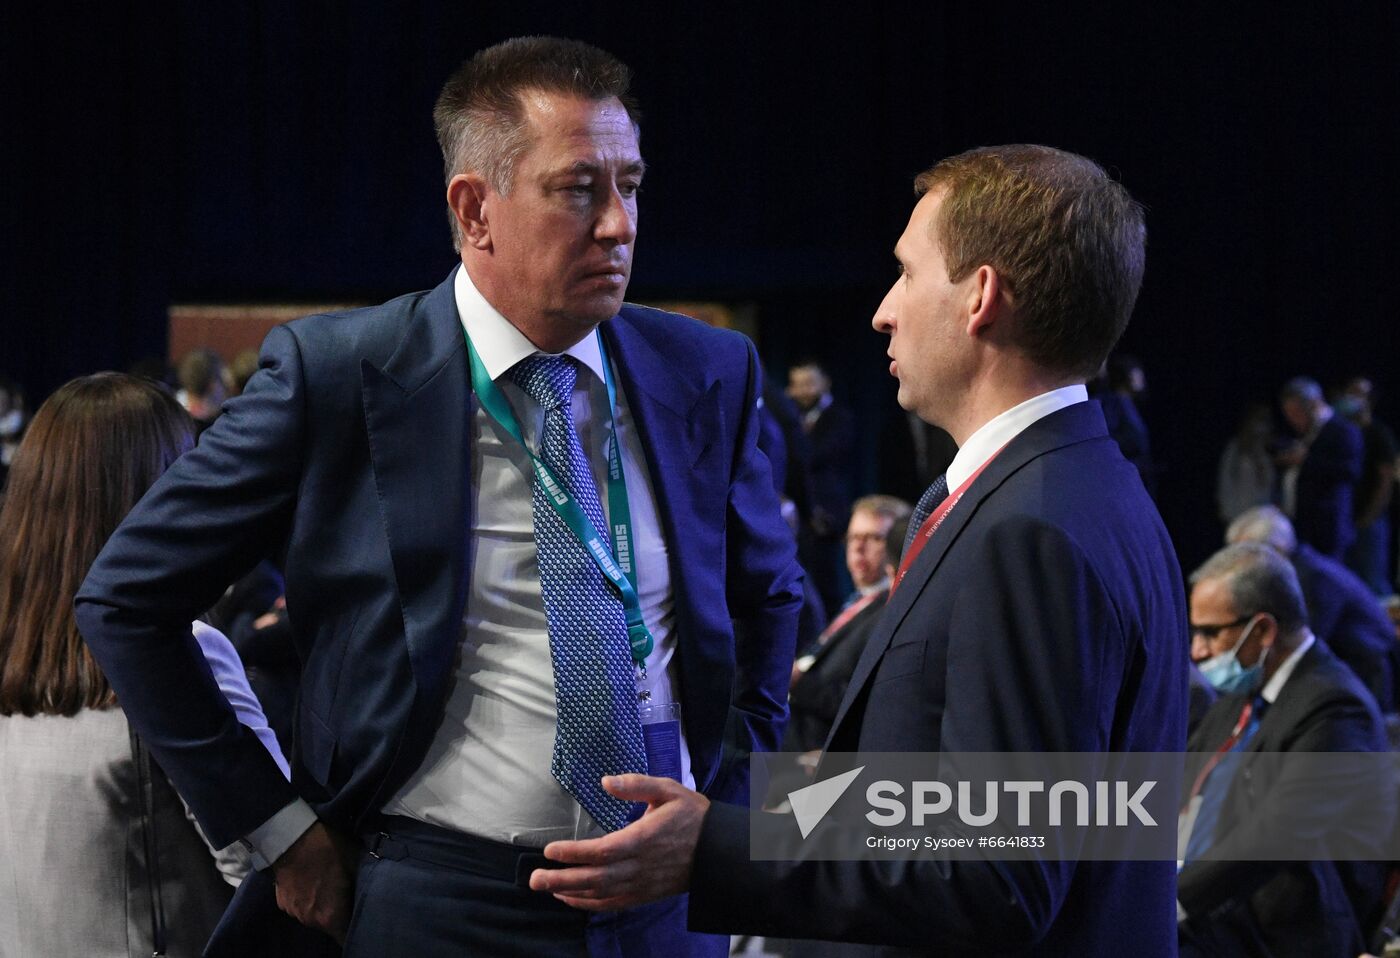 Russia Eastern Economic Forum Sessions